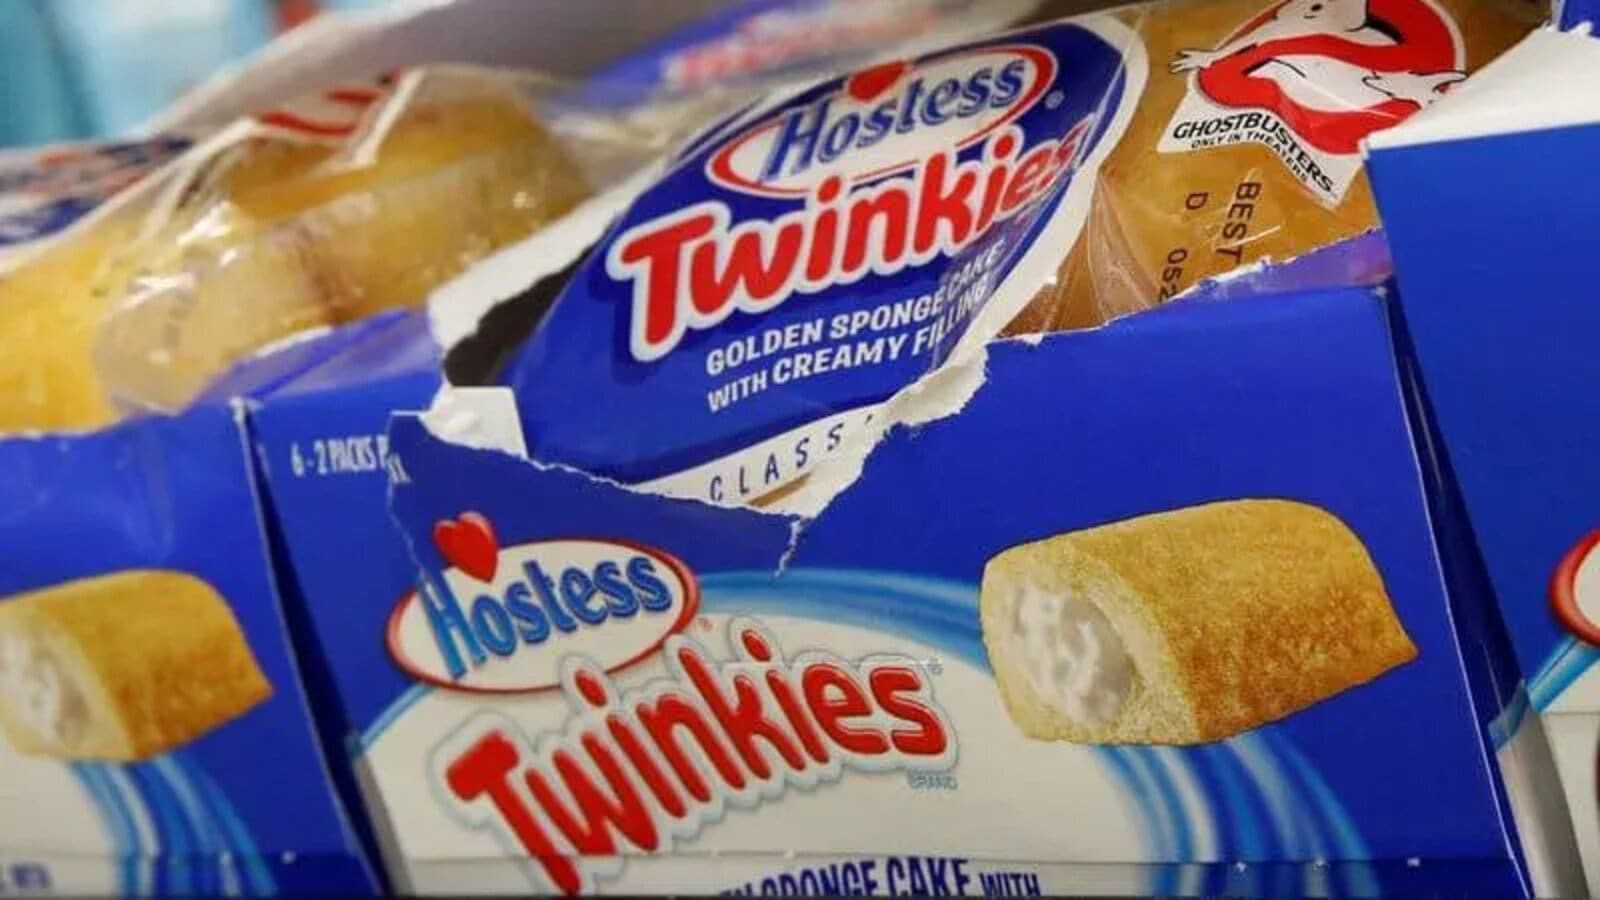 J. M. Smucker enters US$5.6B deal to acquire Hostess Brands  